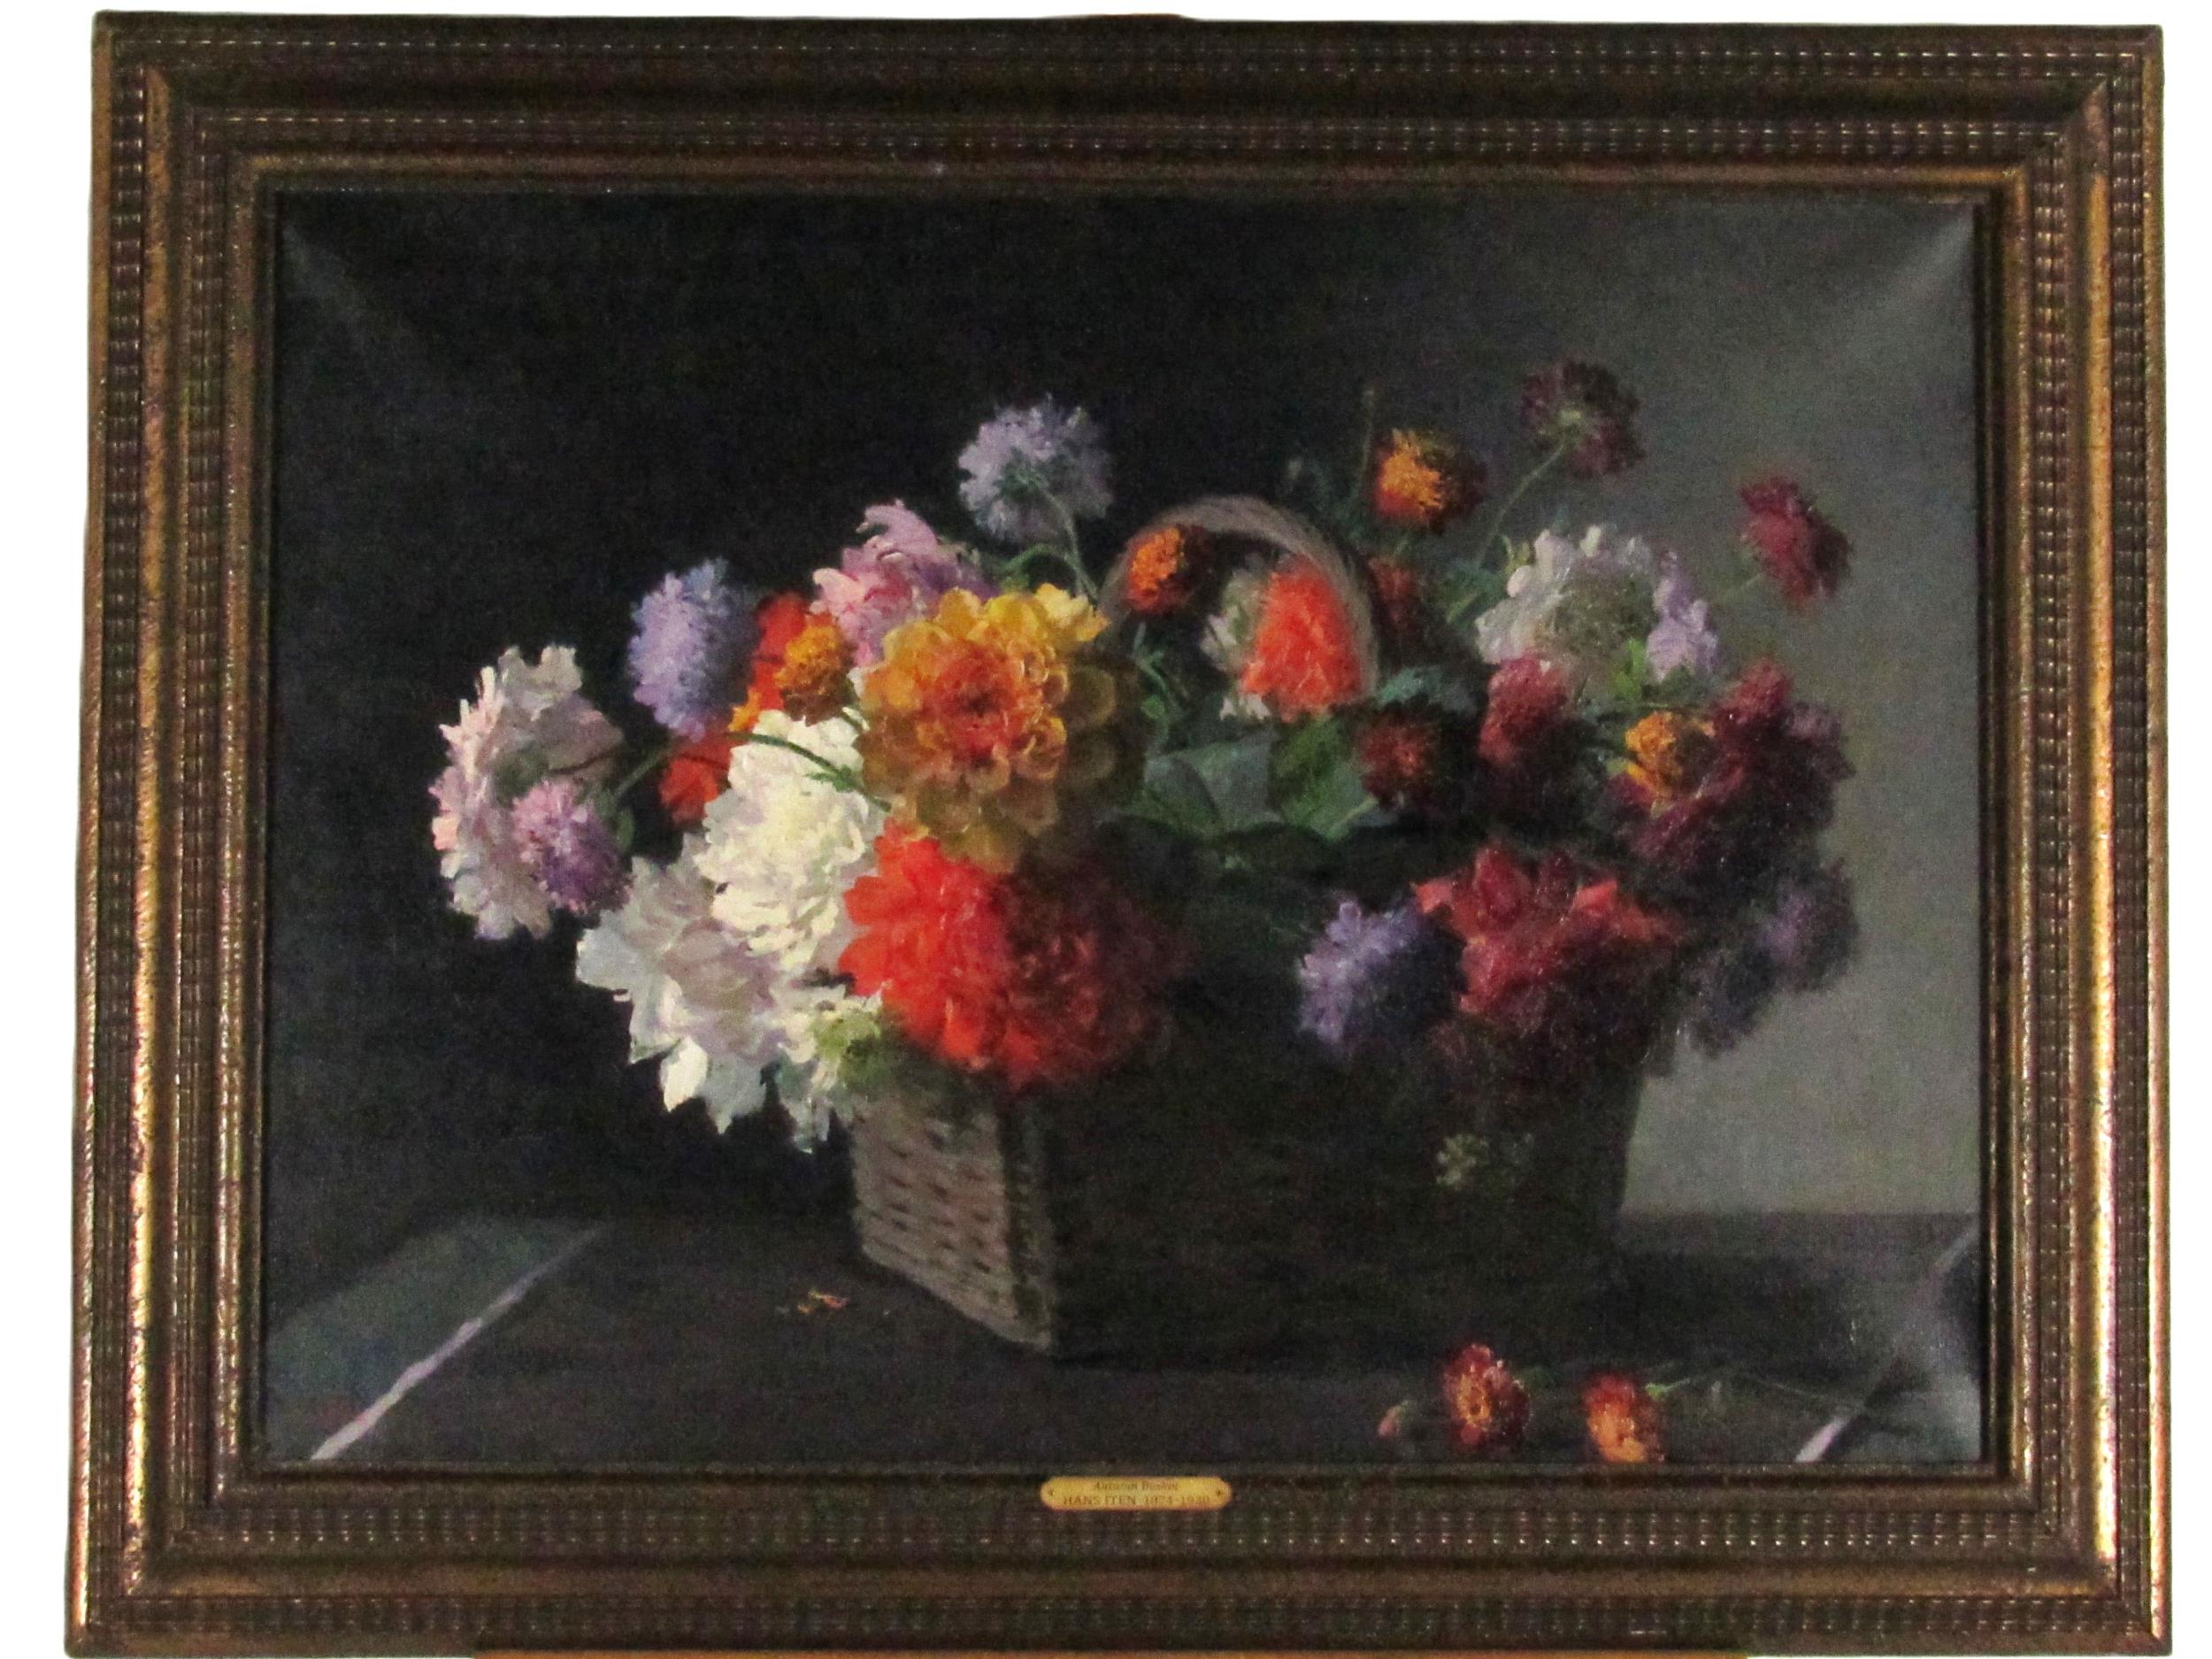 Hans Iten, R.H.A. (1874-1930) "An Autumn Basket," O.O.B., large Still Life with colourful bouquet of